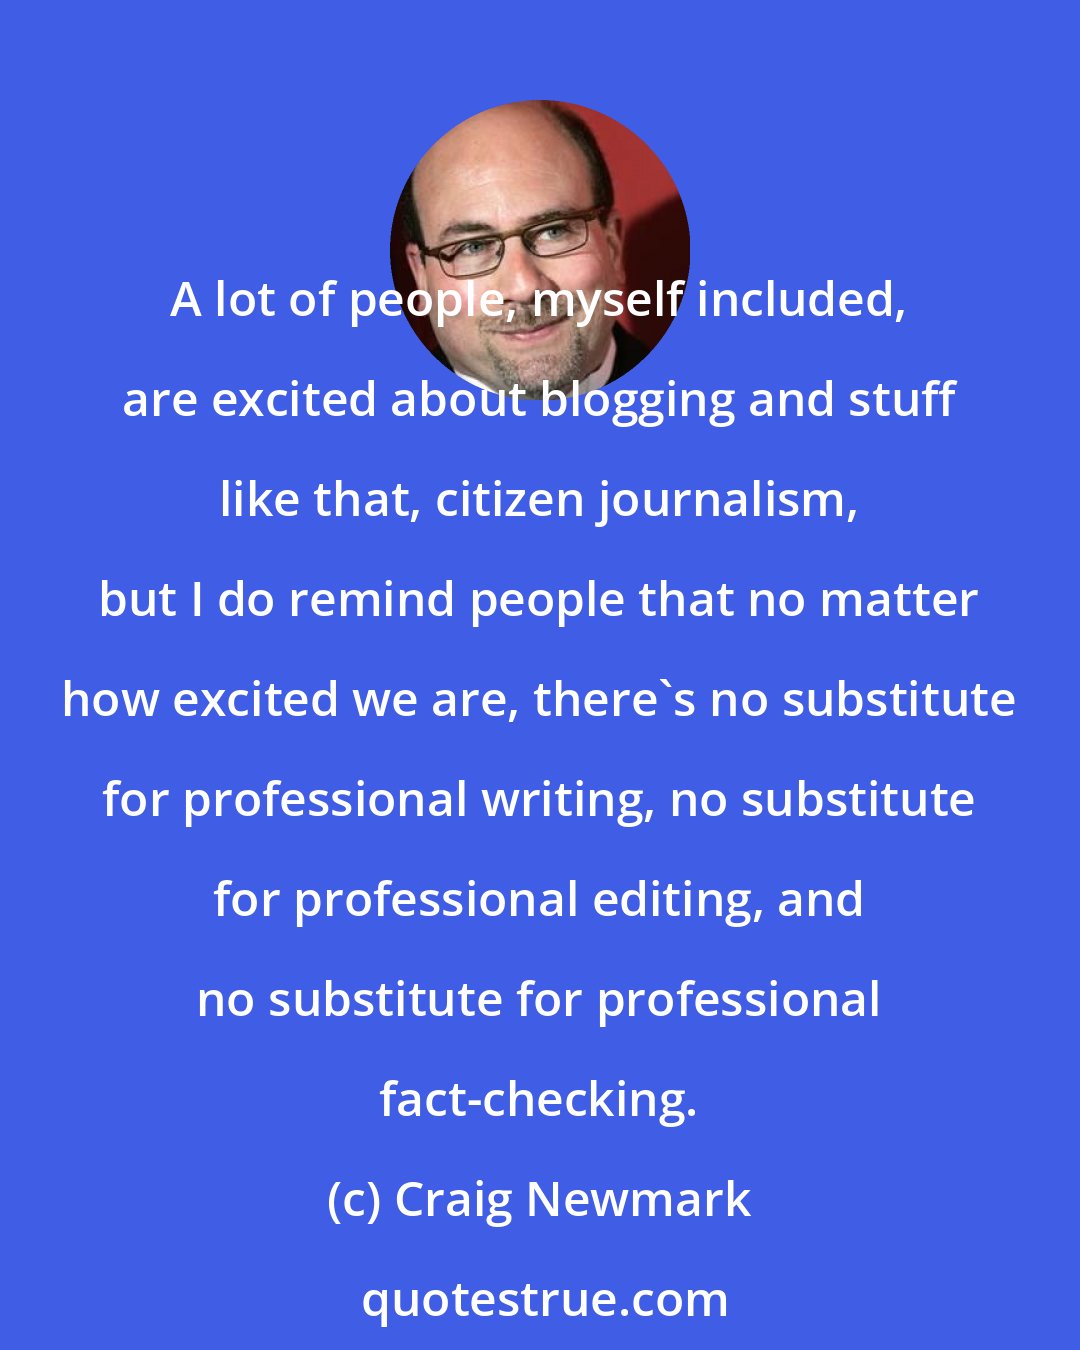 Craig Newmark: A lot of people, myself included, are excited about blogging and stuff like that, citizen journalism, but I do remind people that no matter how excited we are, there's no substitute for professional writing, no substitute for professional editing, and no substitute for professional fact-checking.